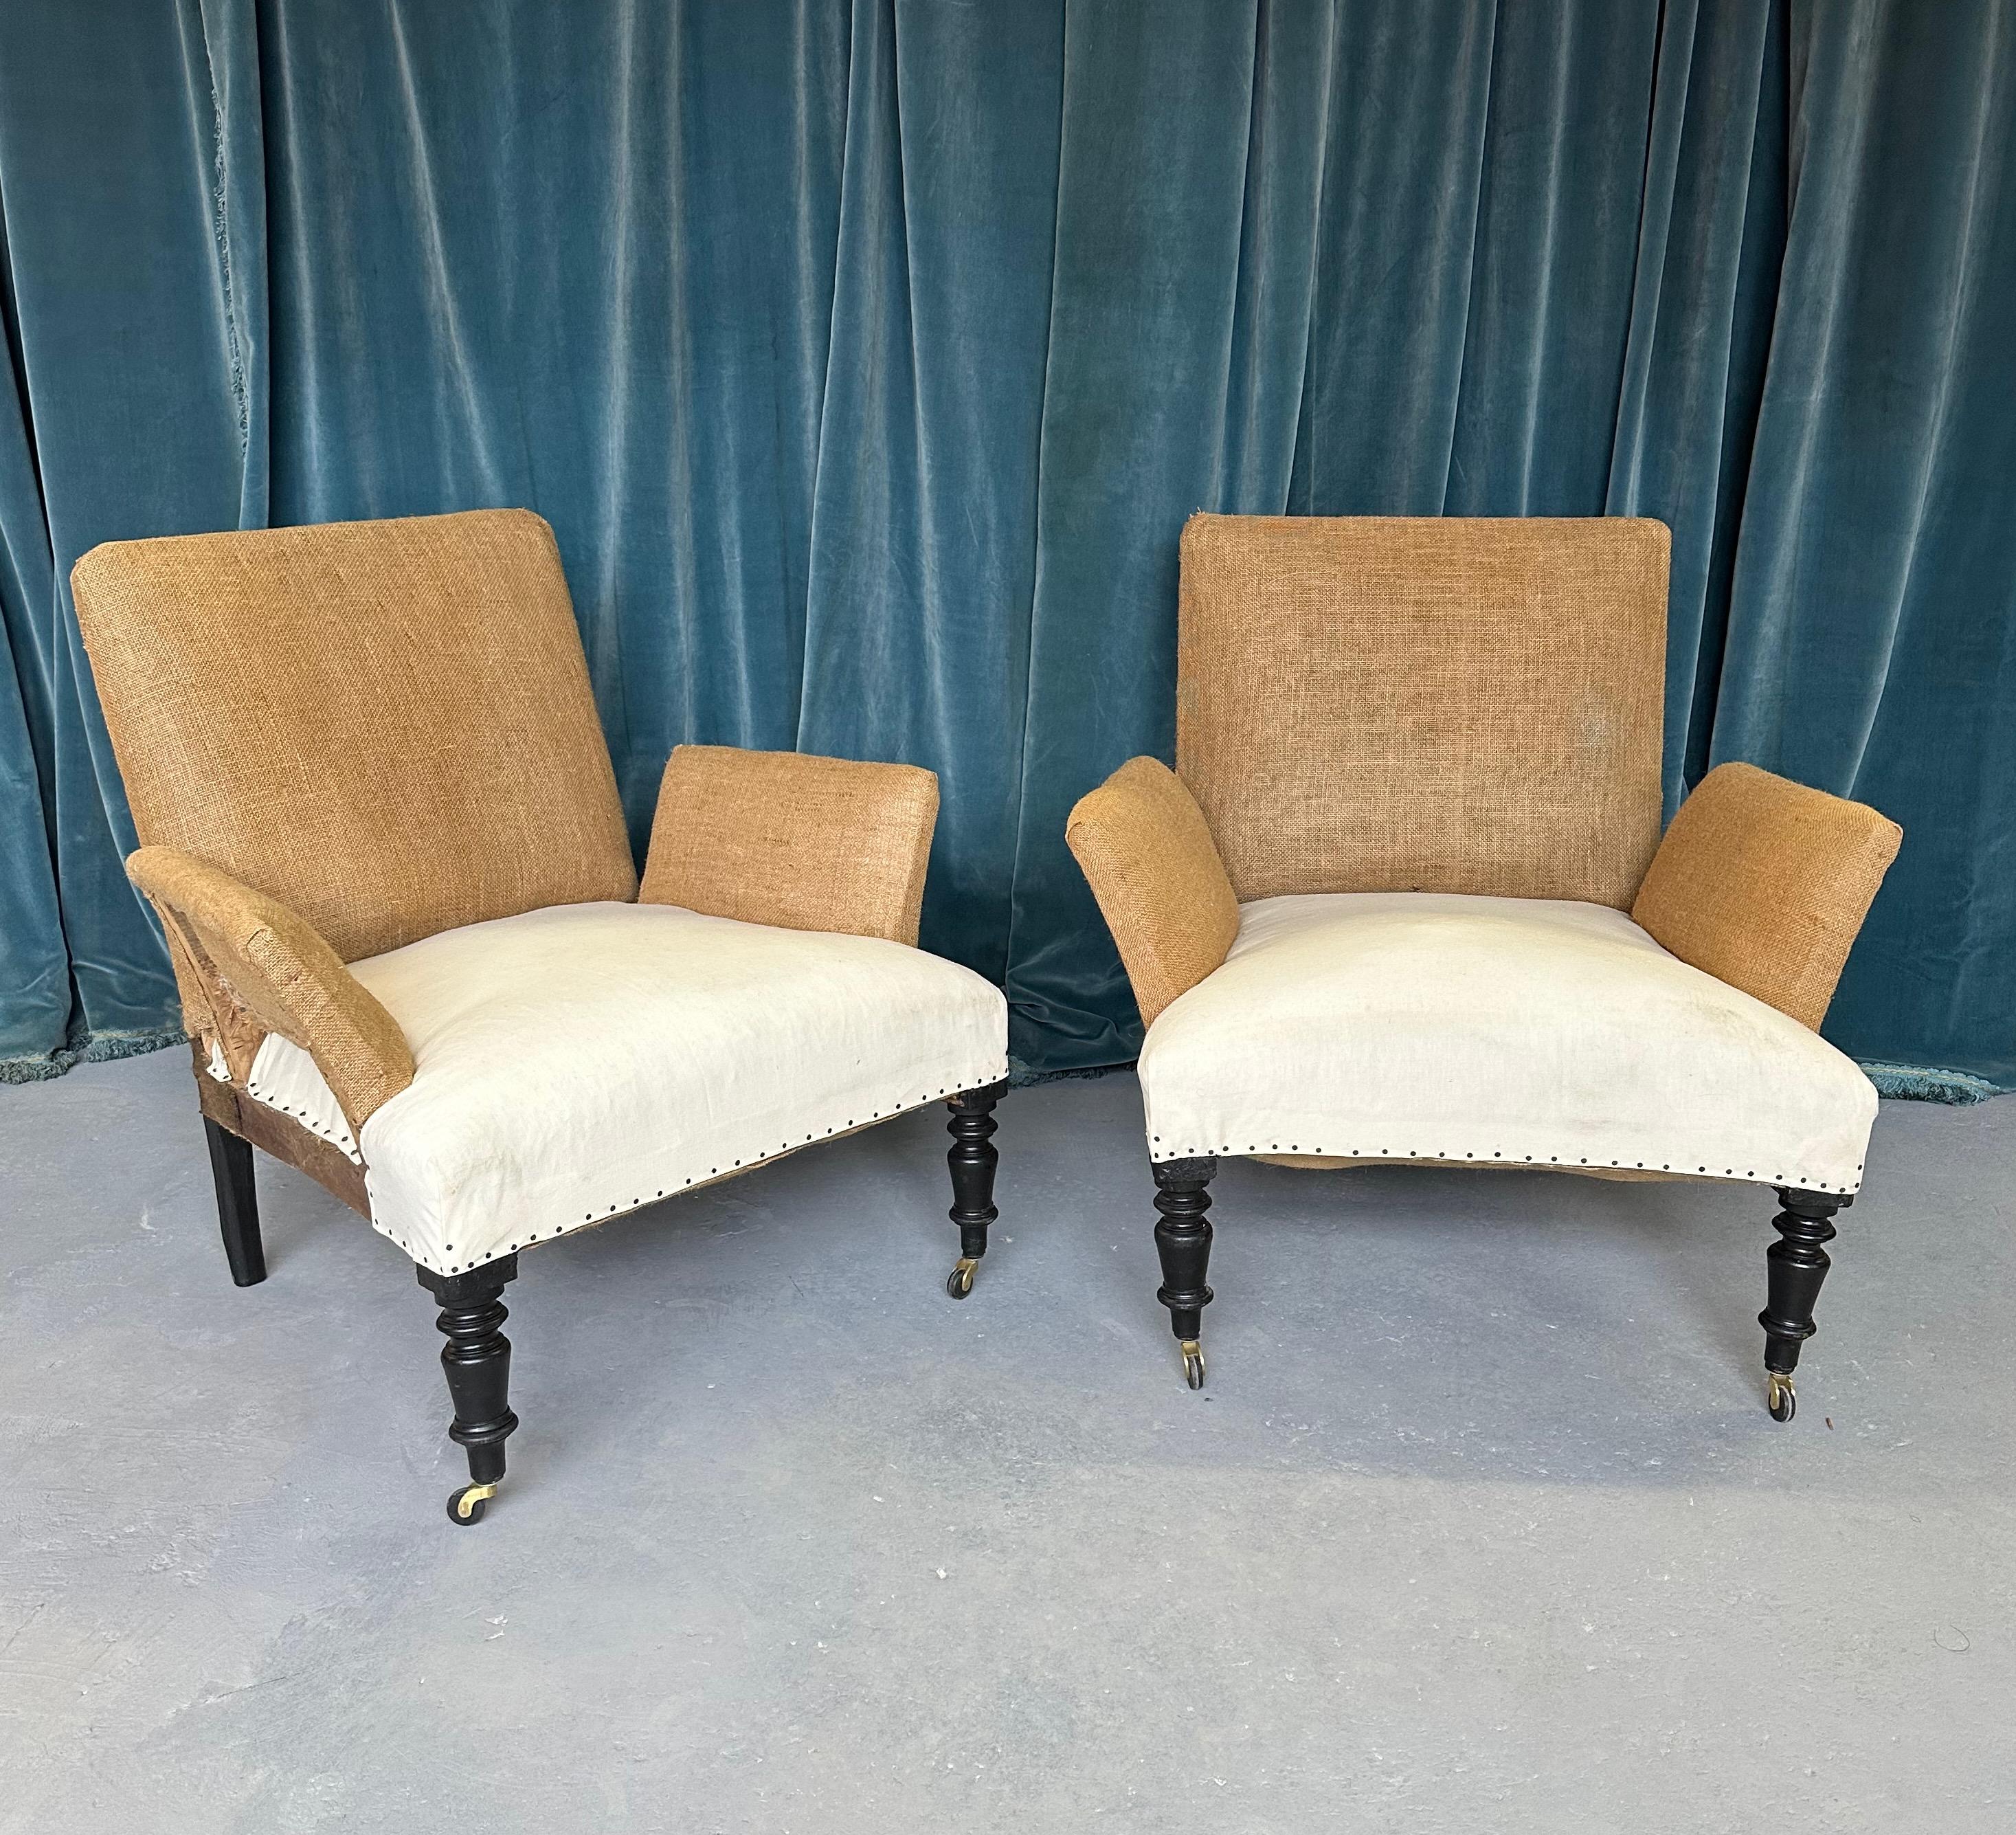 An interesting pair of French late 19th century armchairs that have been stripped down to the burlap and muslin and are ready to be upholstered. This unusual pair of period armchairs features rectangular backs as well as rectangular arms that are